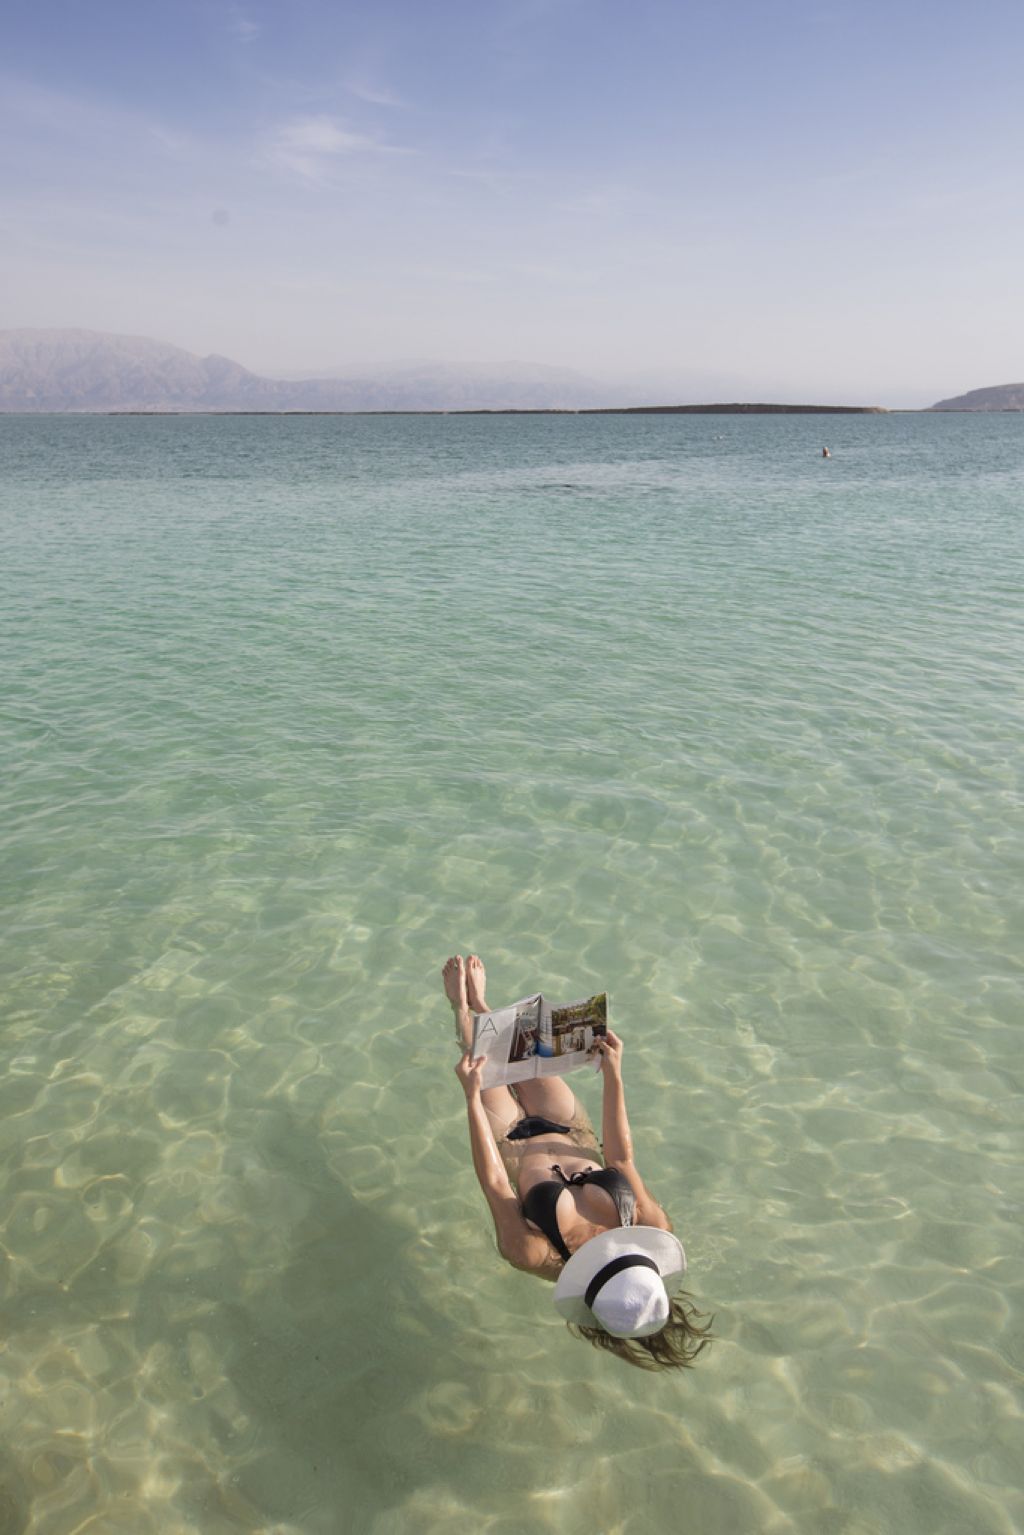 dead sea2 Floating on the Dead Sea by Itamar Grinberg